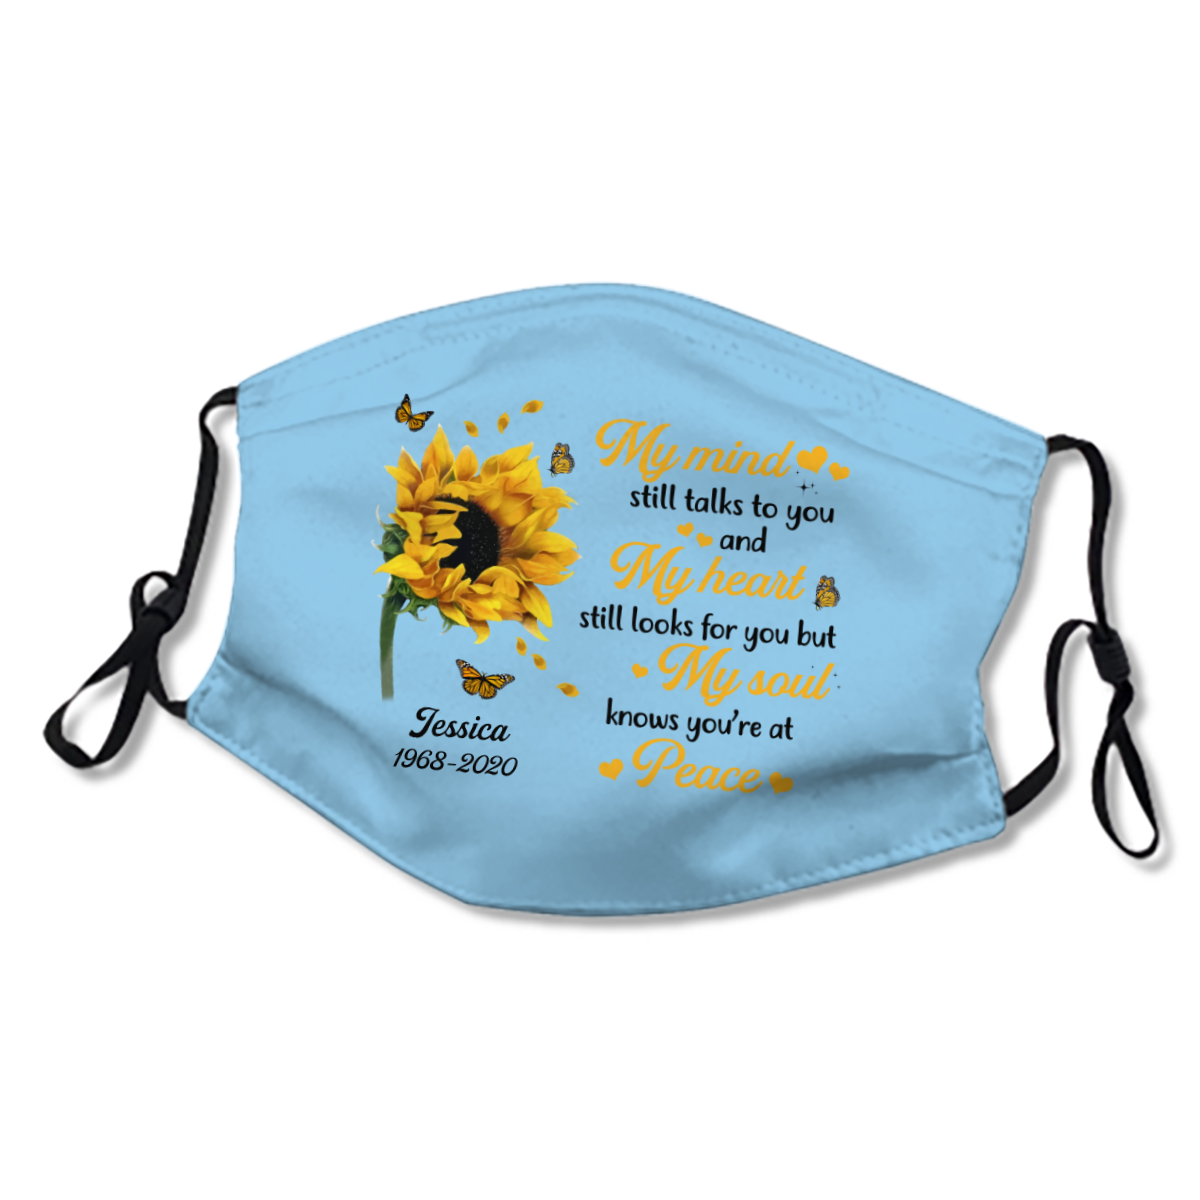 Sunflower My Mind Still Talks To You Memorial Personalized Name & Year Face Mask